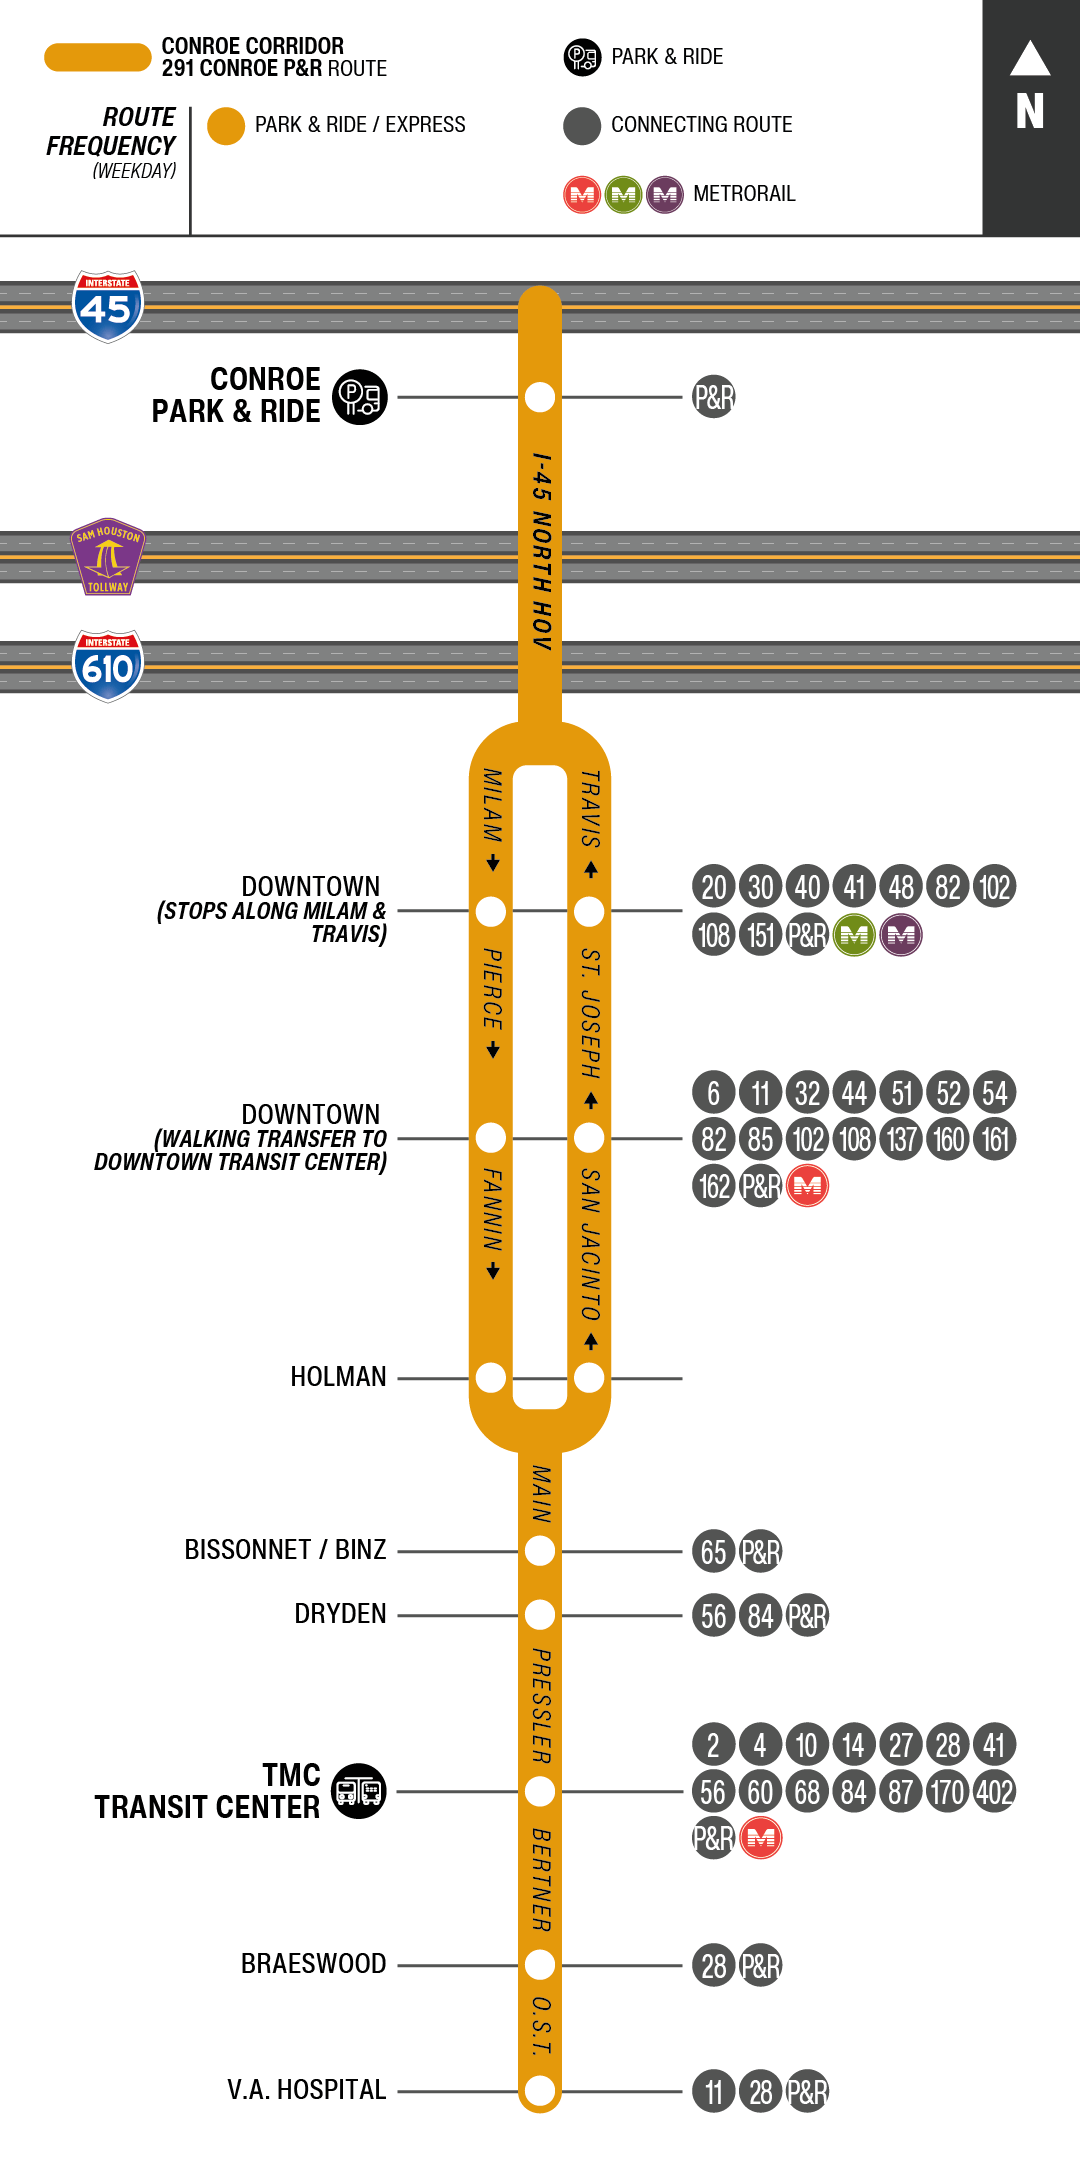 Route map for 291 Conroe Park & Ride bus